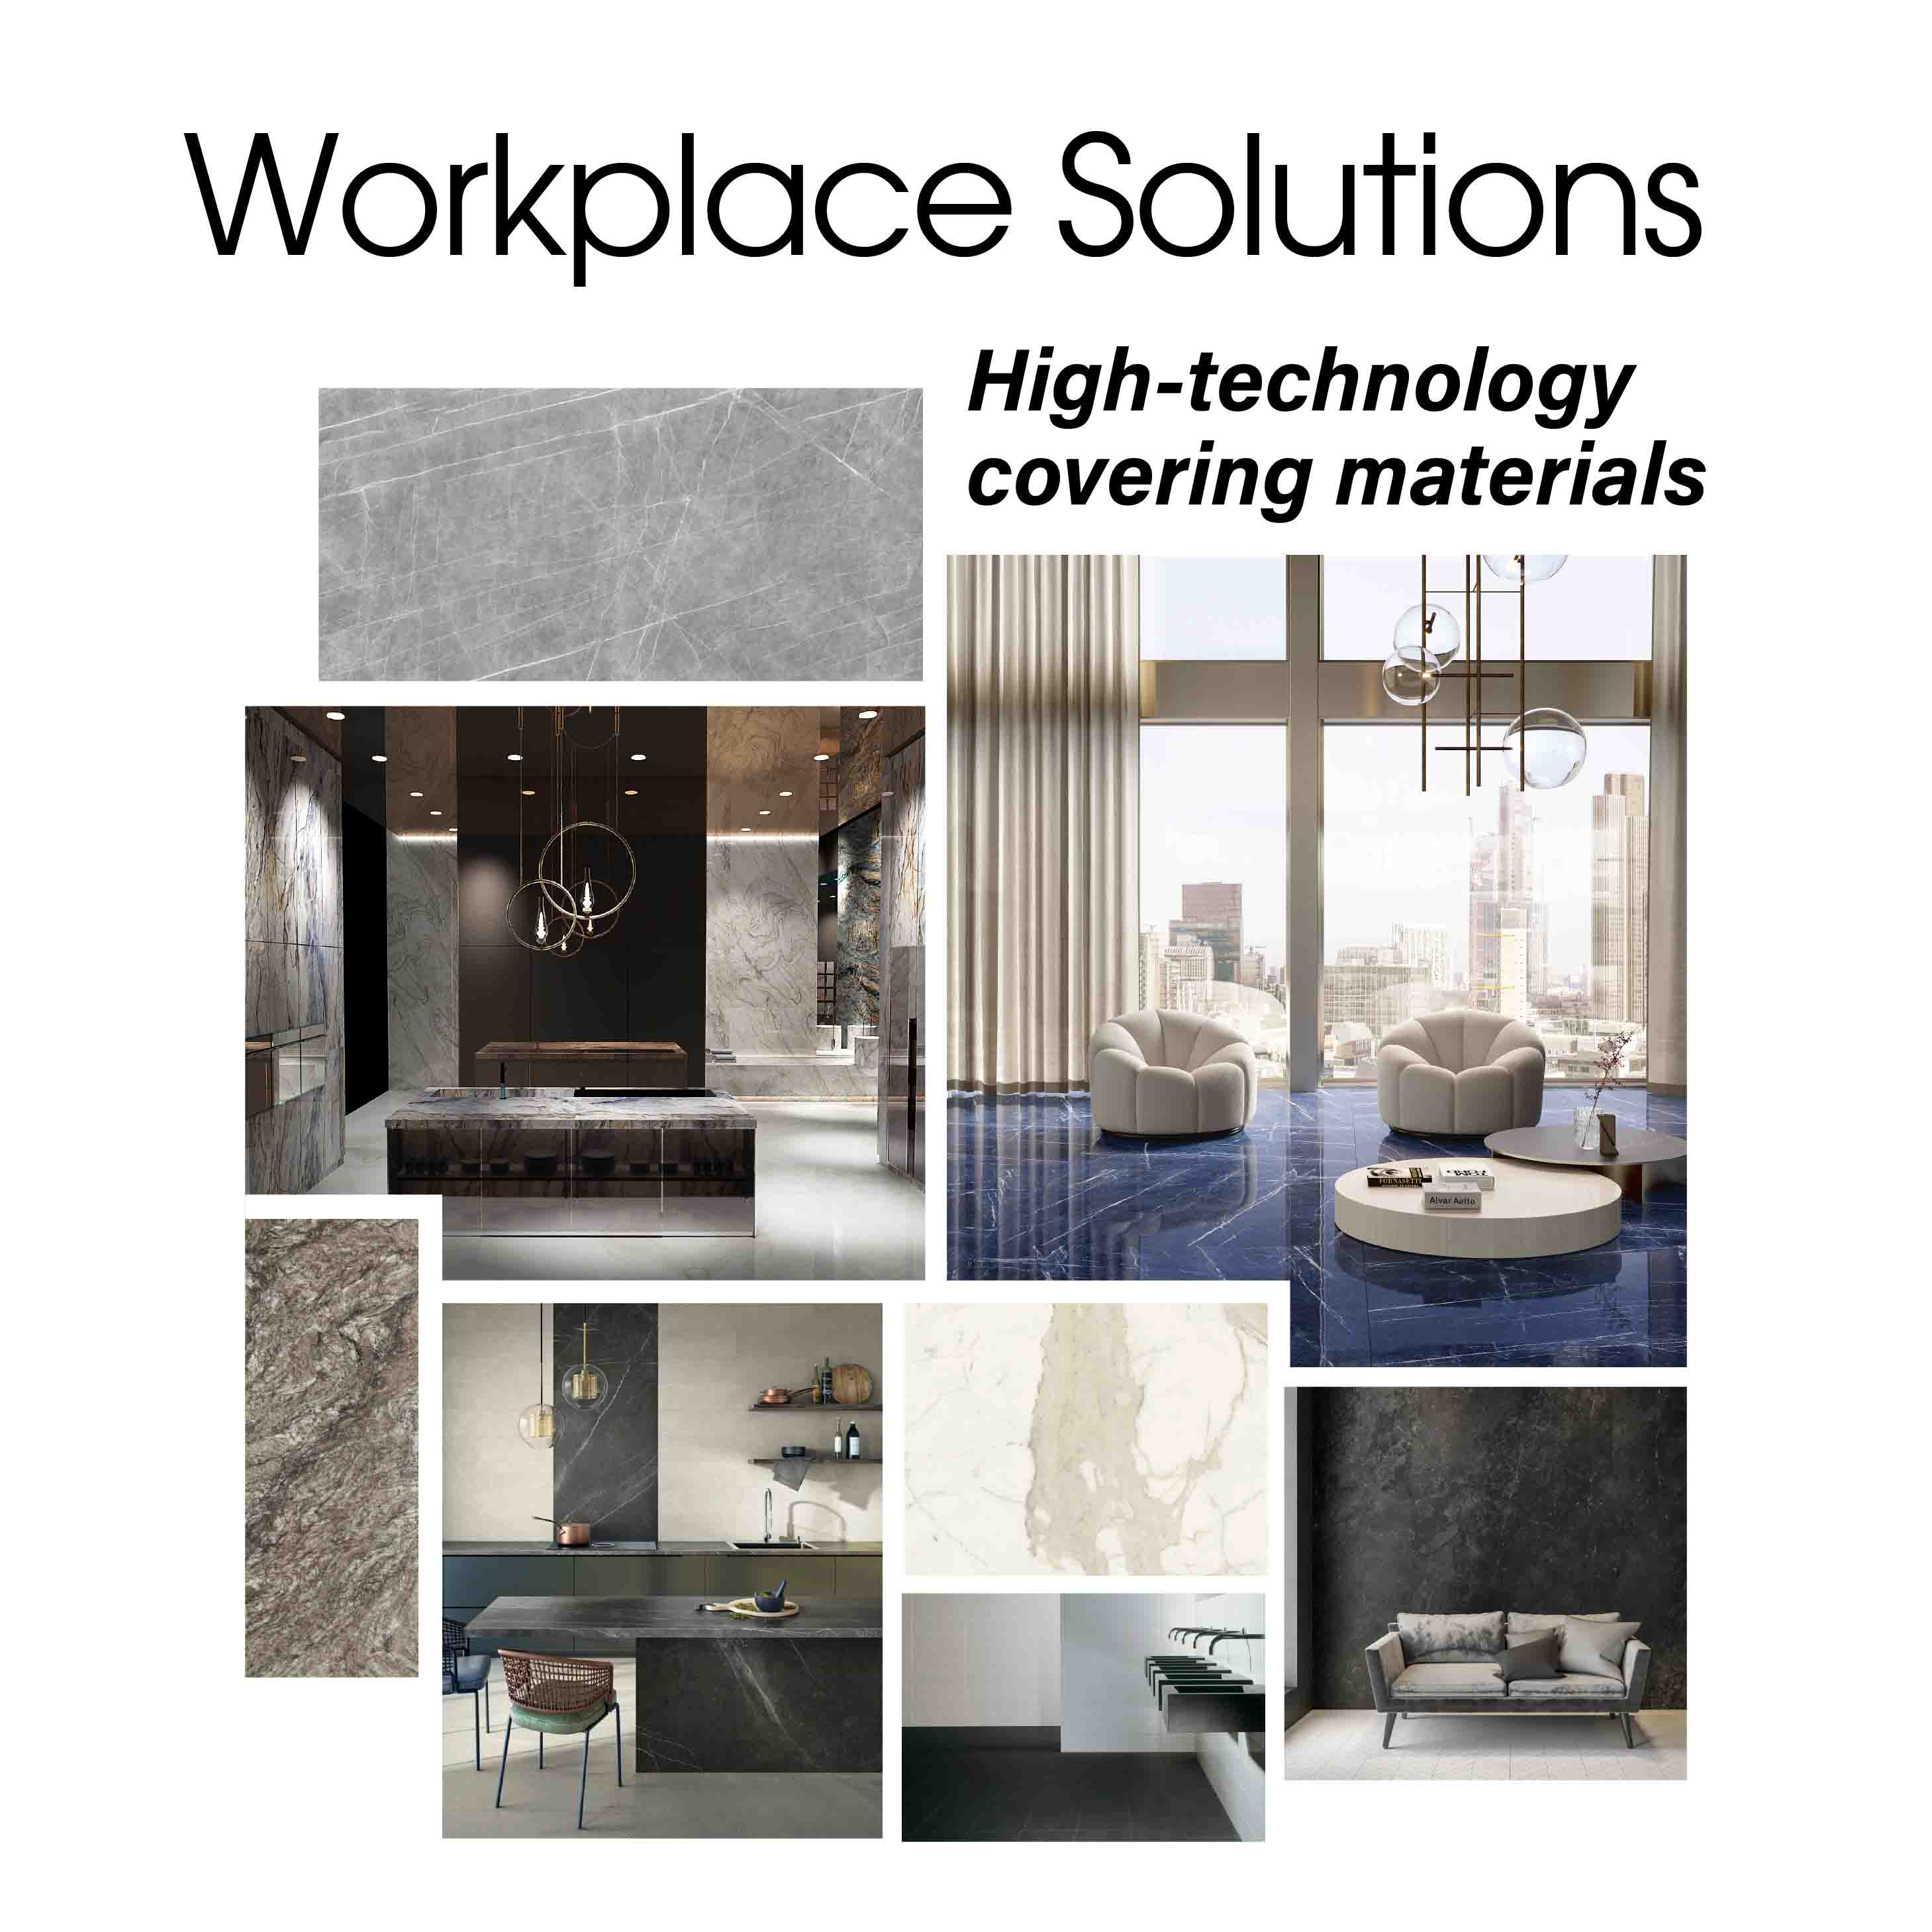 Workplace Solutions | High-technology covering materials